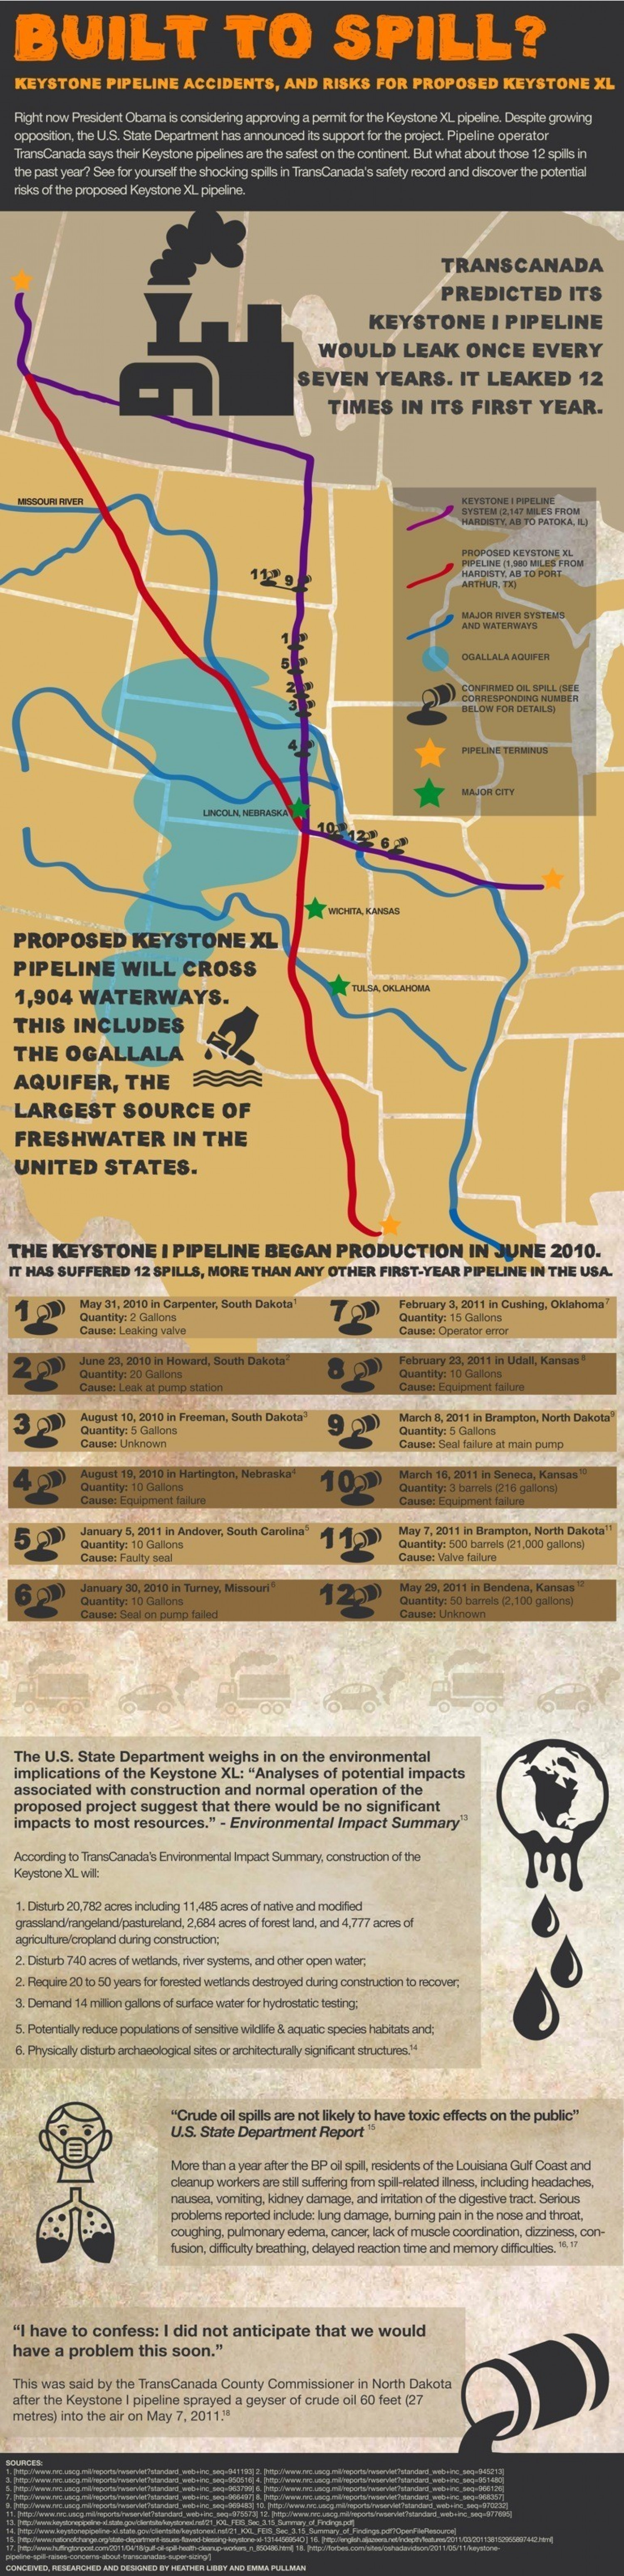 Keystone Pipeline: 'Built To Spill' Infographic